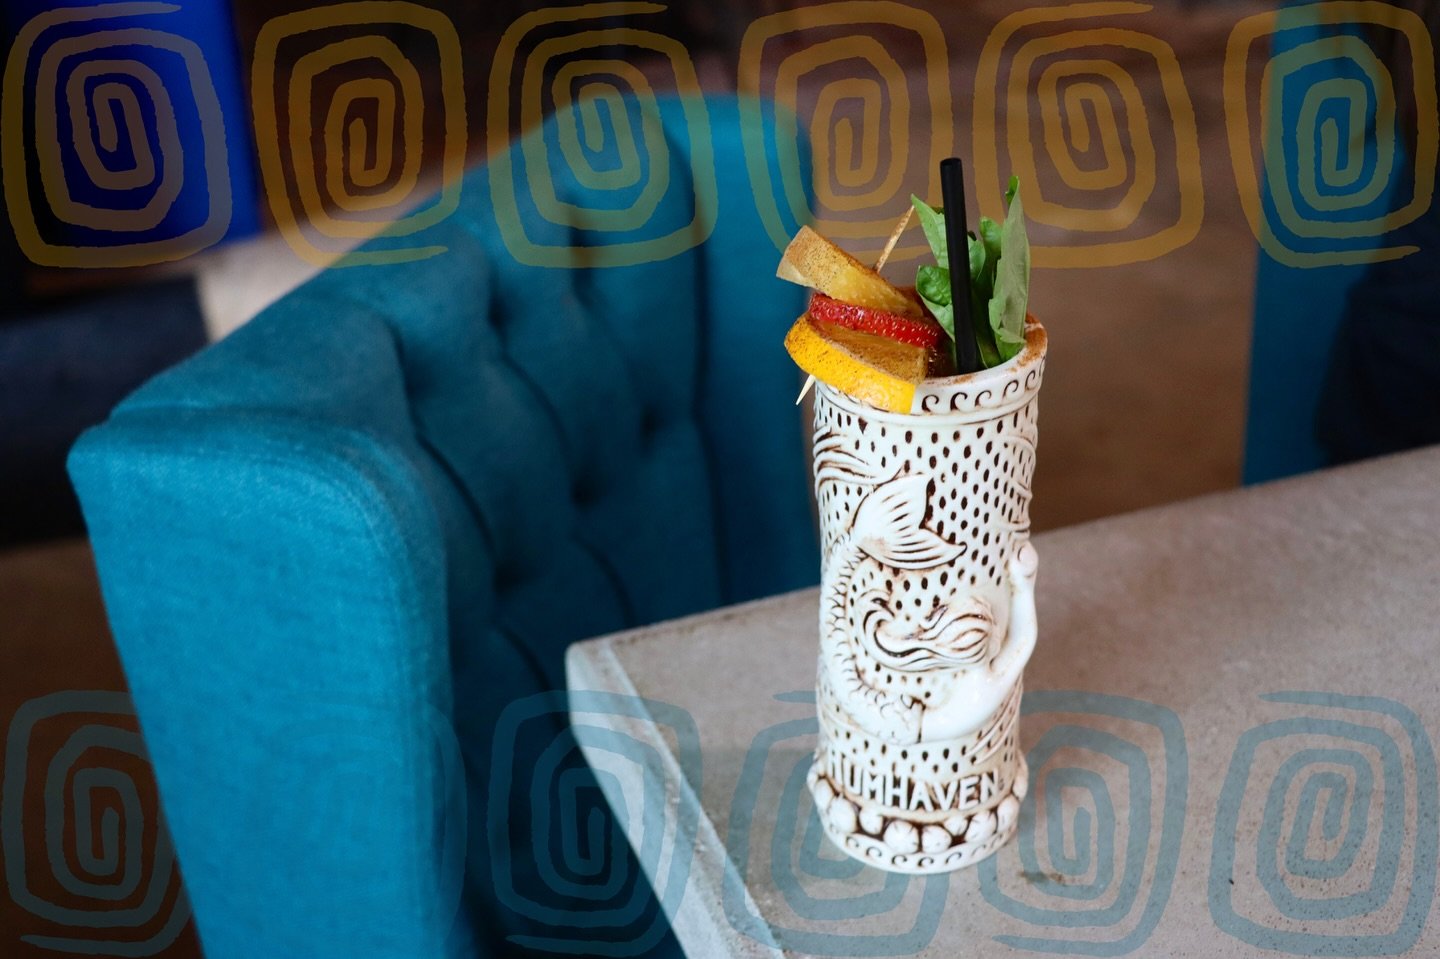 March cocktail of the month: Tiki Time 🗿🏝️
This sweet rum cocktail will transport you to your favorite tropical island with its mix of fresh pineapple, passion fruit &amp; citrus 🍊